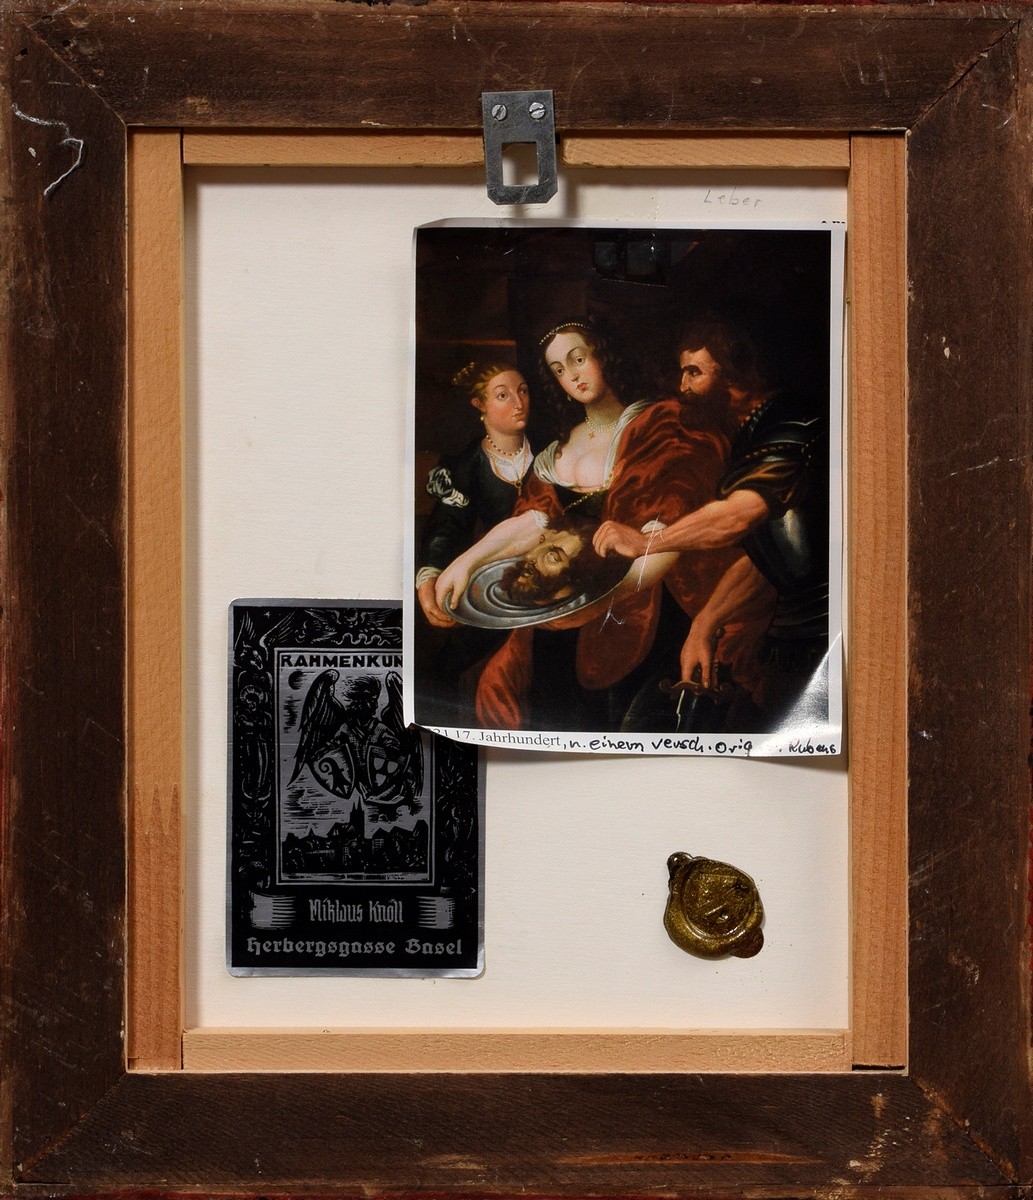 Unknown copyist c. 1700 "Herodias and Salome with the head of John the Baptist" after Peter Paul Ru - Image 3 of 3